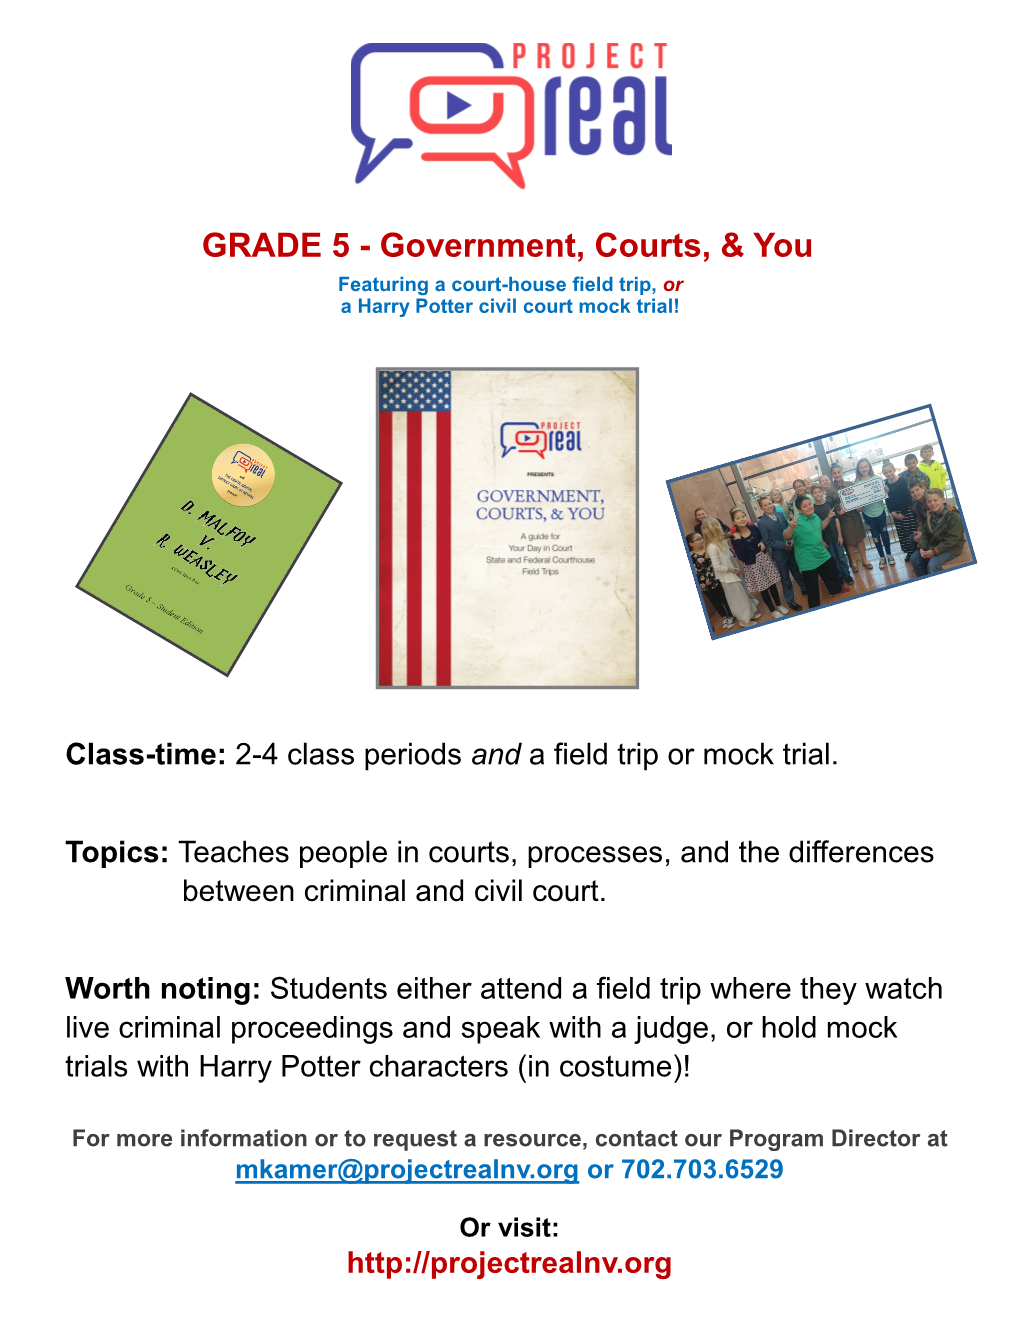 GRADE 5 - Government, Courts, & You Featuring a Court-House Field Trip, Or a Harry Potter Civil Court Mock Trial!